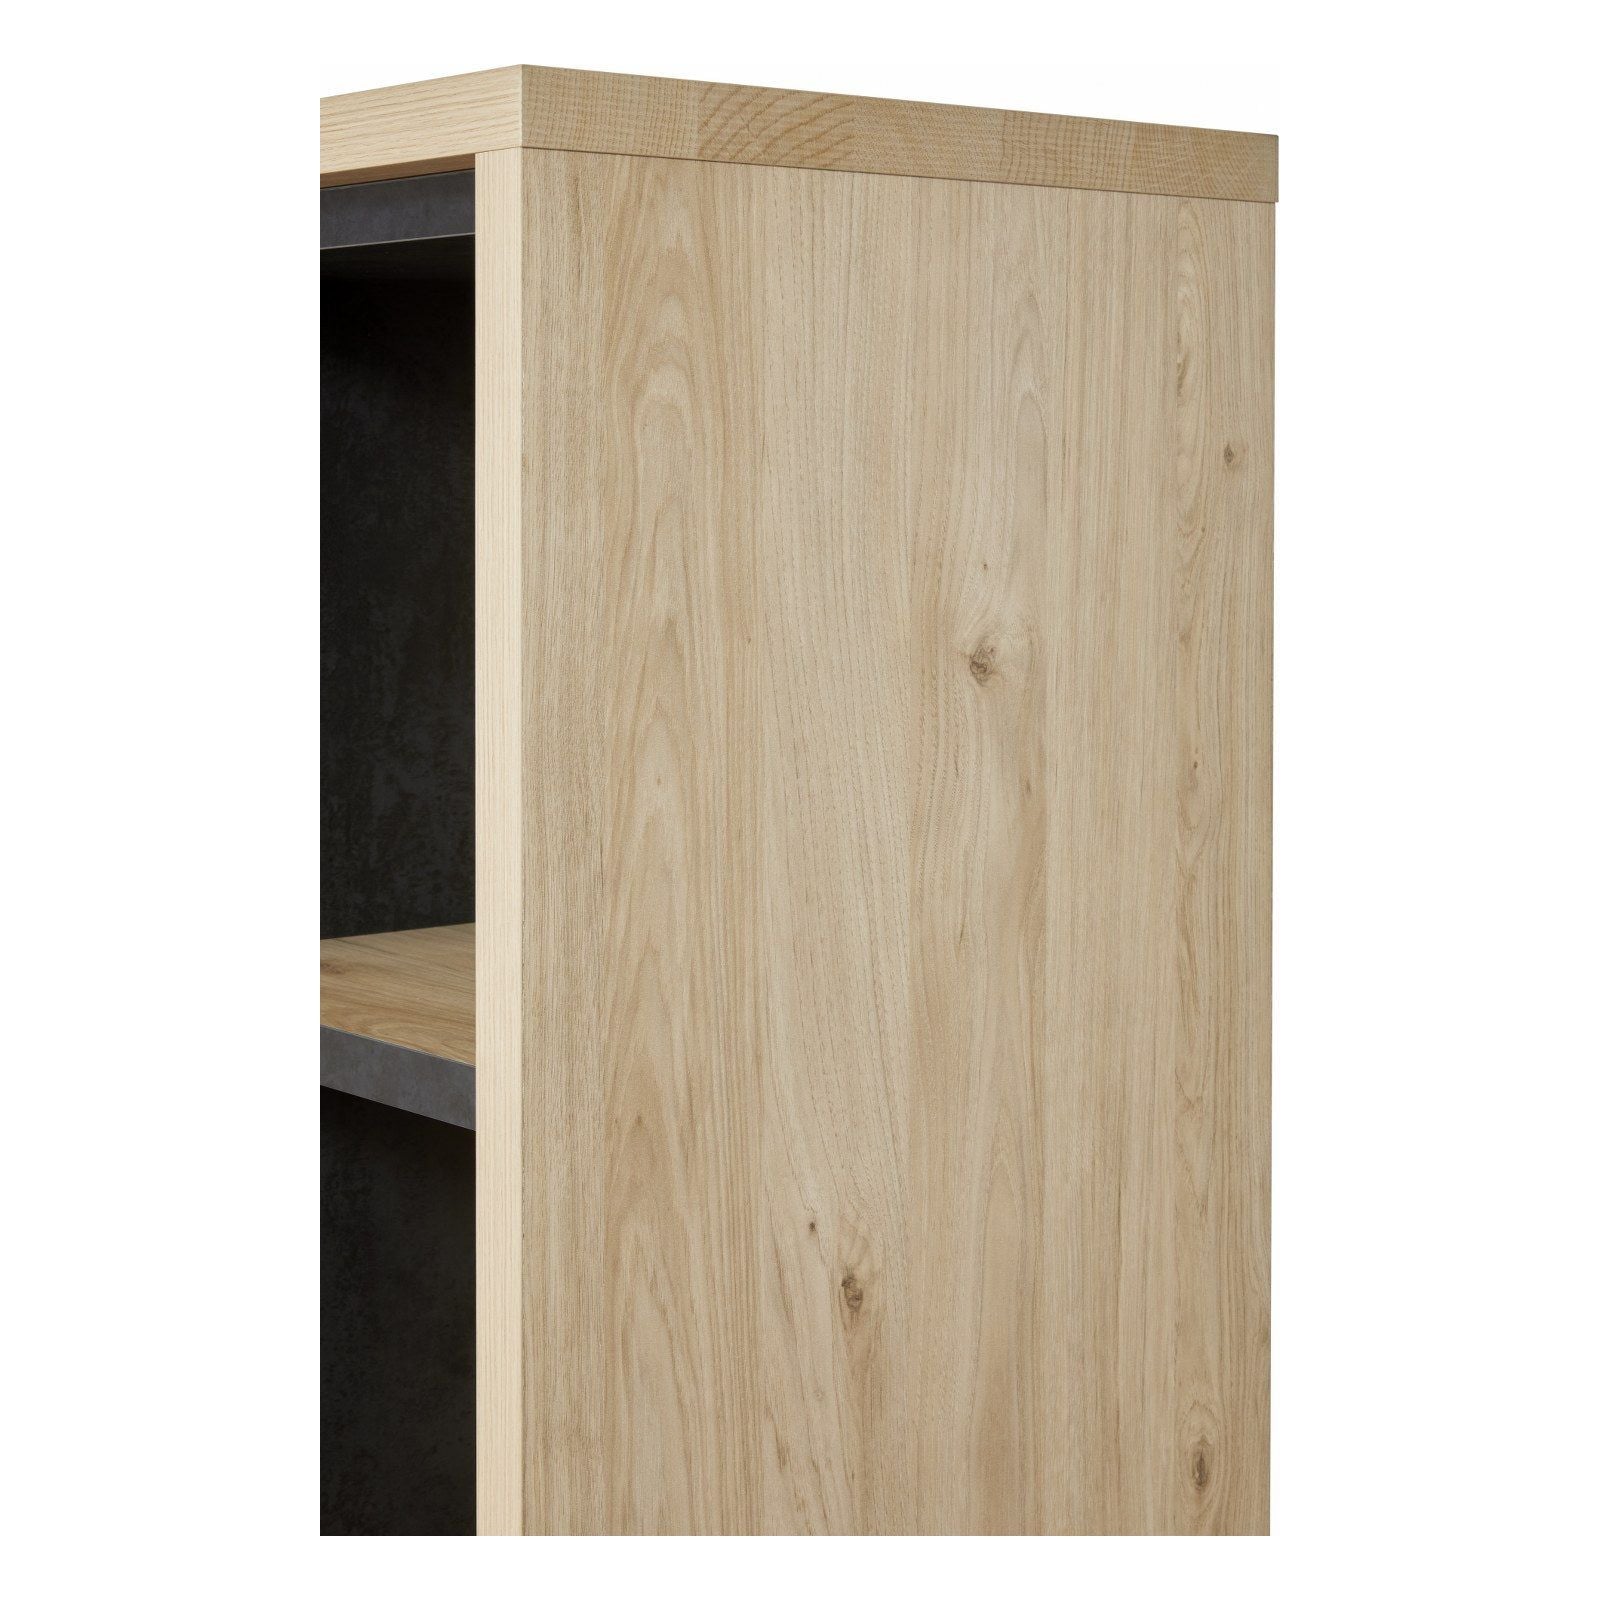 Wall cabinet | Furniture series Tilly | brown, natural, black | 115x